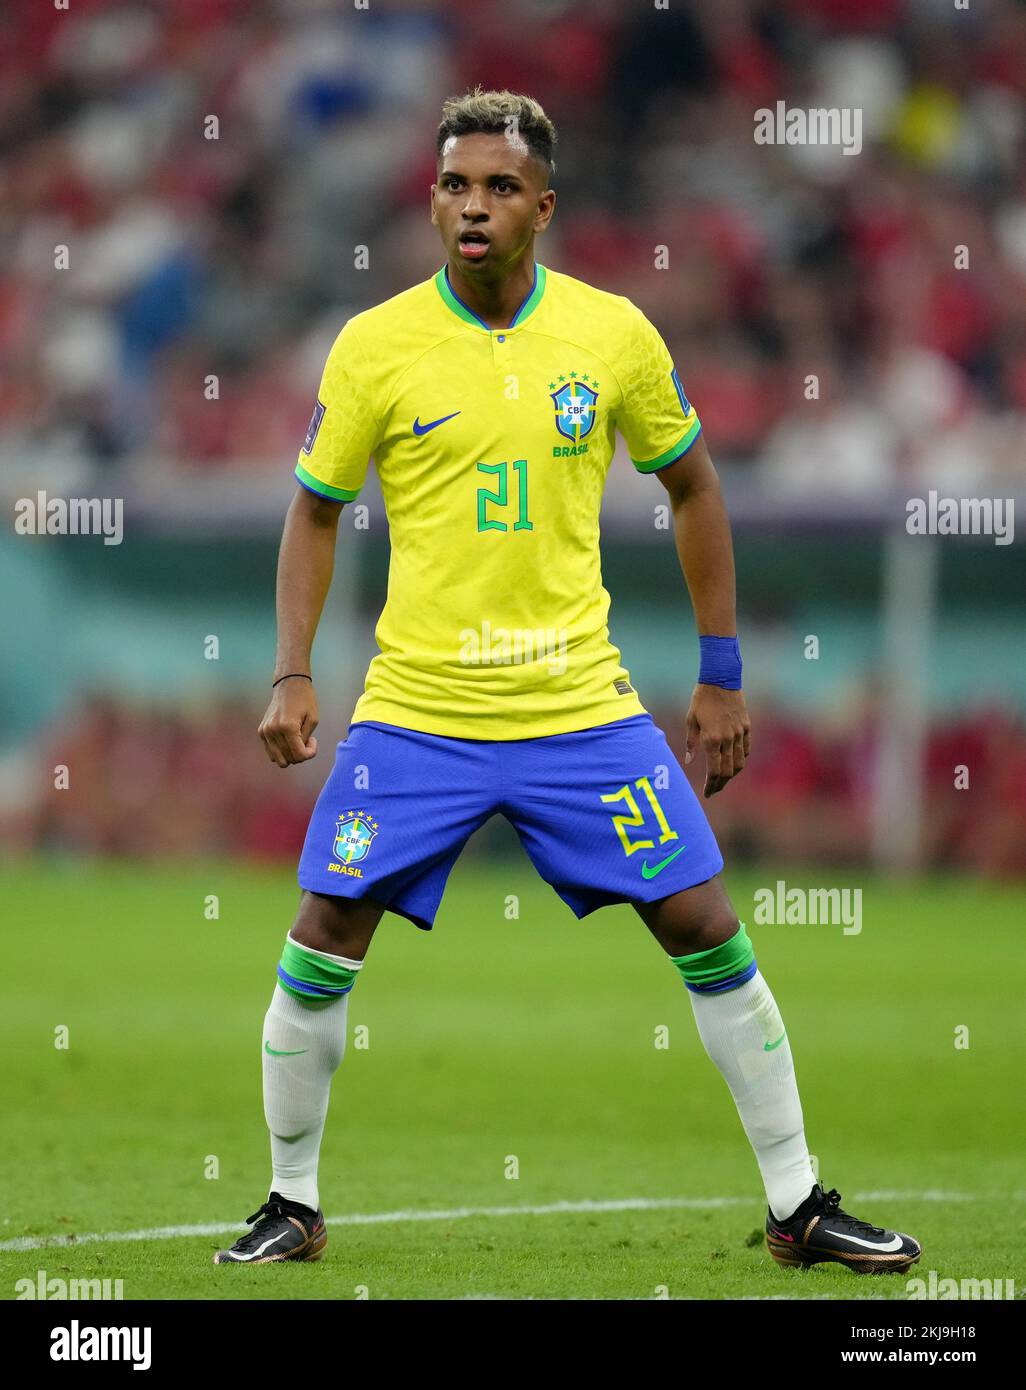 Brazil's Rodrygo during the FIFA World Cup Group G match at the